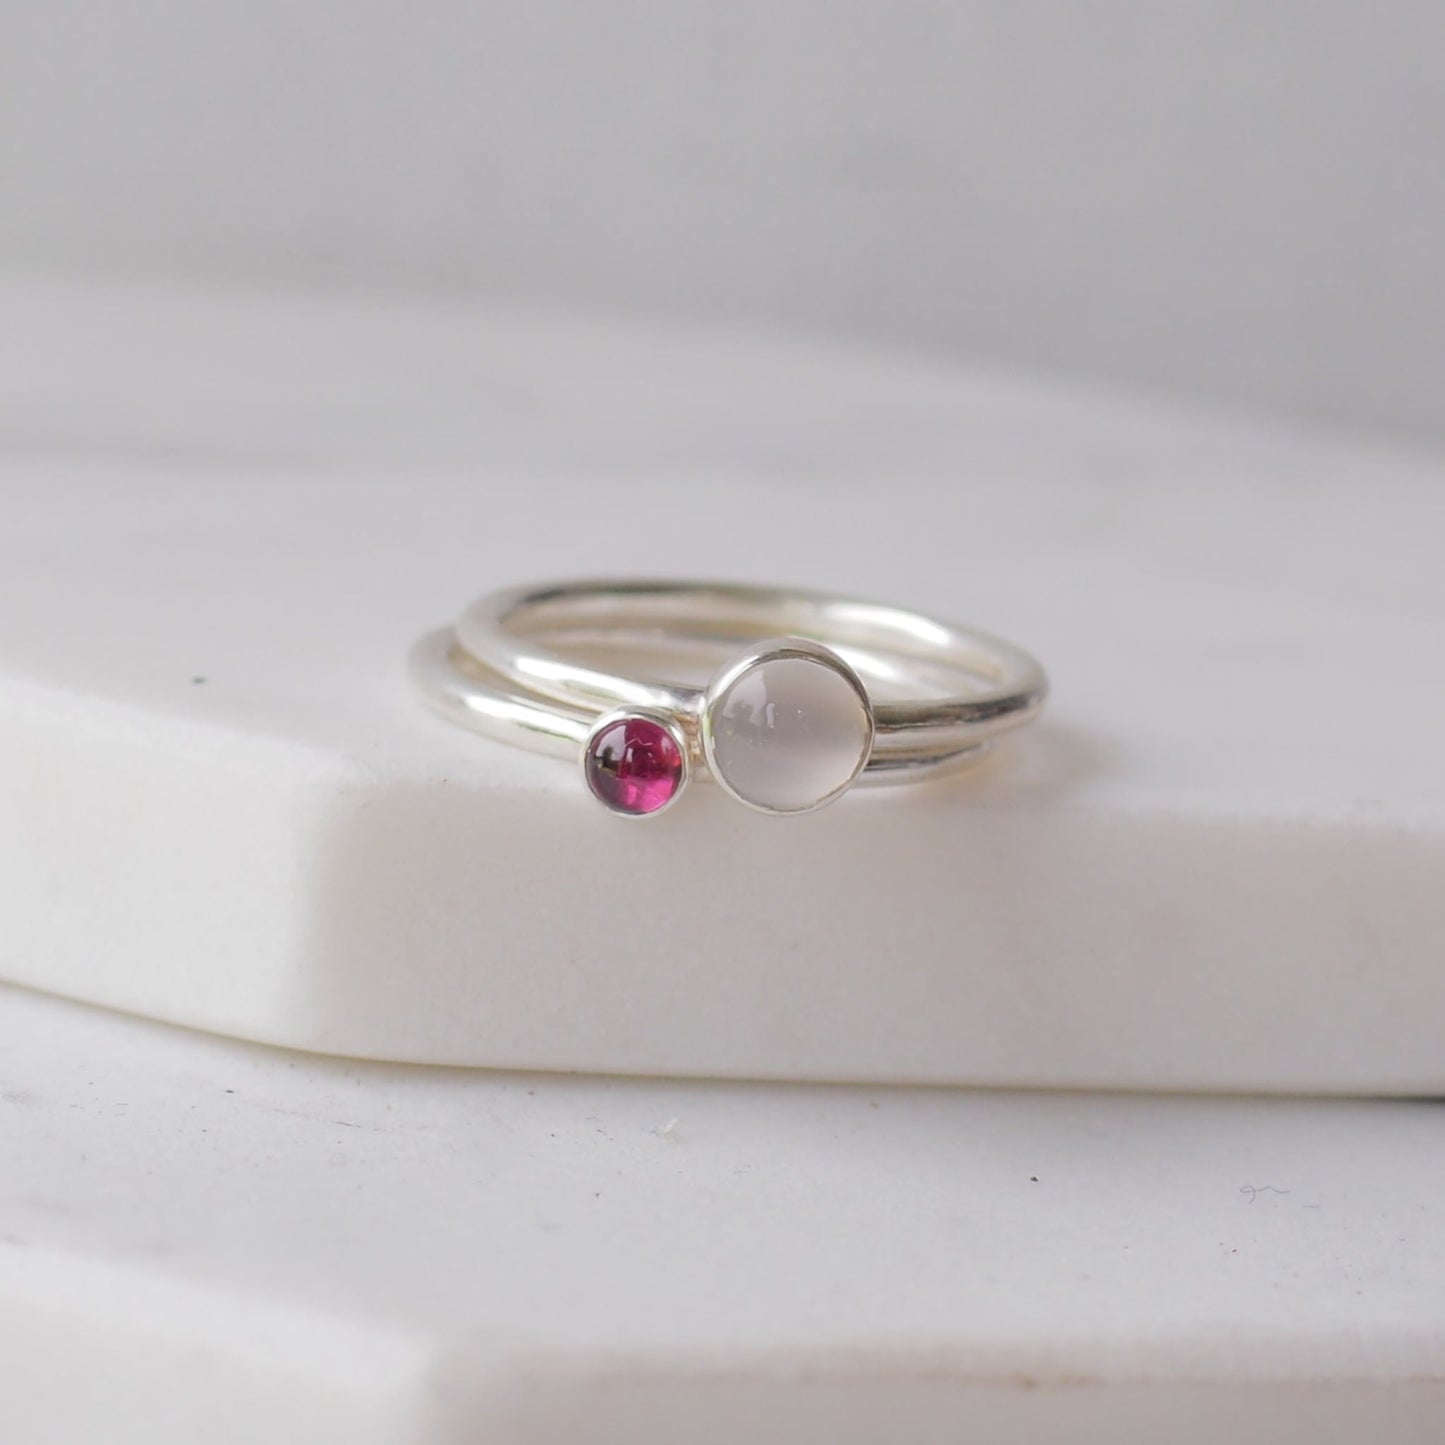 Two silver rings with moonstone and garnet gemstones. Birthstones for June and January. Handmade to your ring size by maram jewellery in Scotland , UK